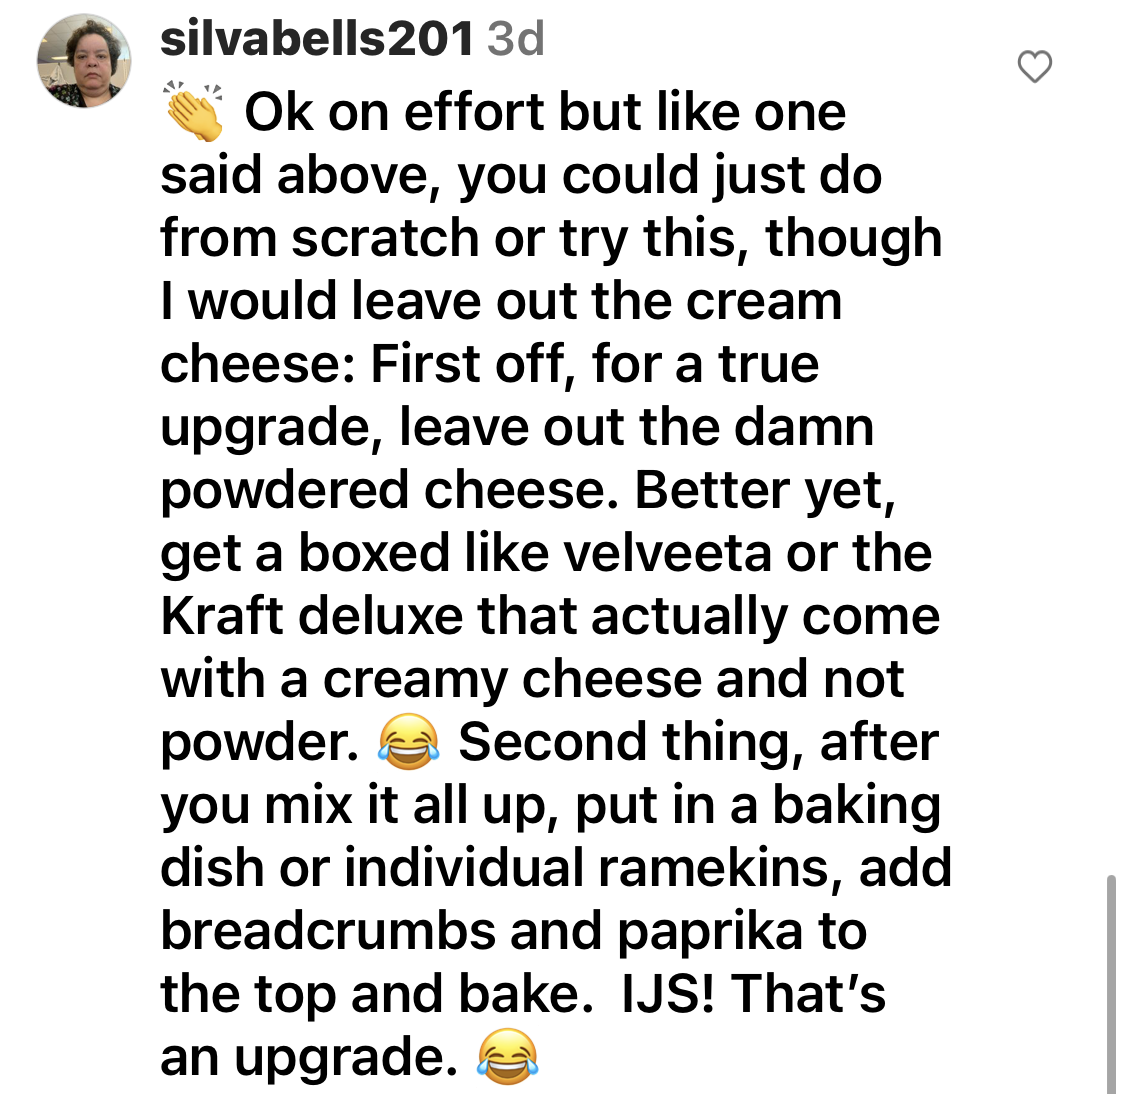 Comment to leave out the &quot;damn powdered cheese&quot; and &quot;get a boxed like Velveeta or the Kraft deluxe that come with a creamy cheese&quot; and &quot;after you mix it all up, put in a baking dish or individual ramekins, add breadcrumbs and paprika to top and bake&quot;